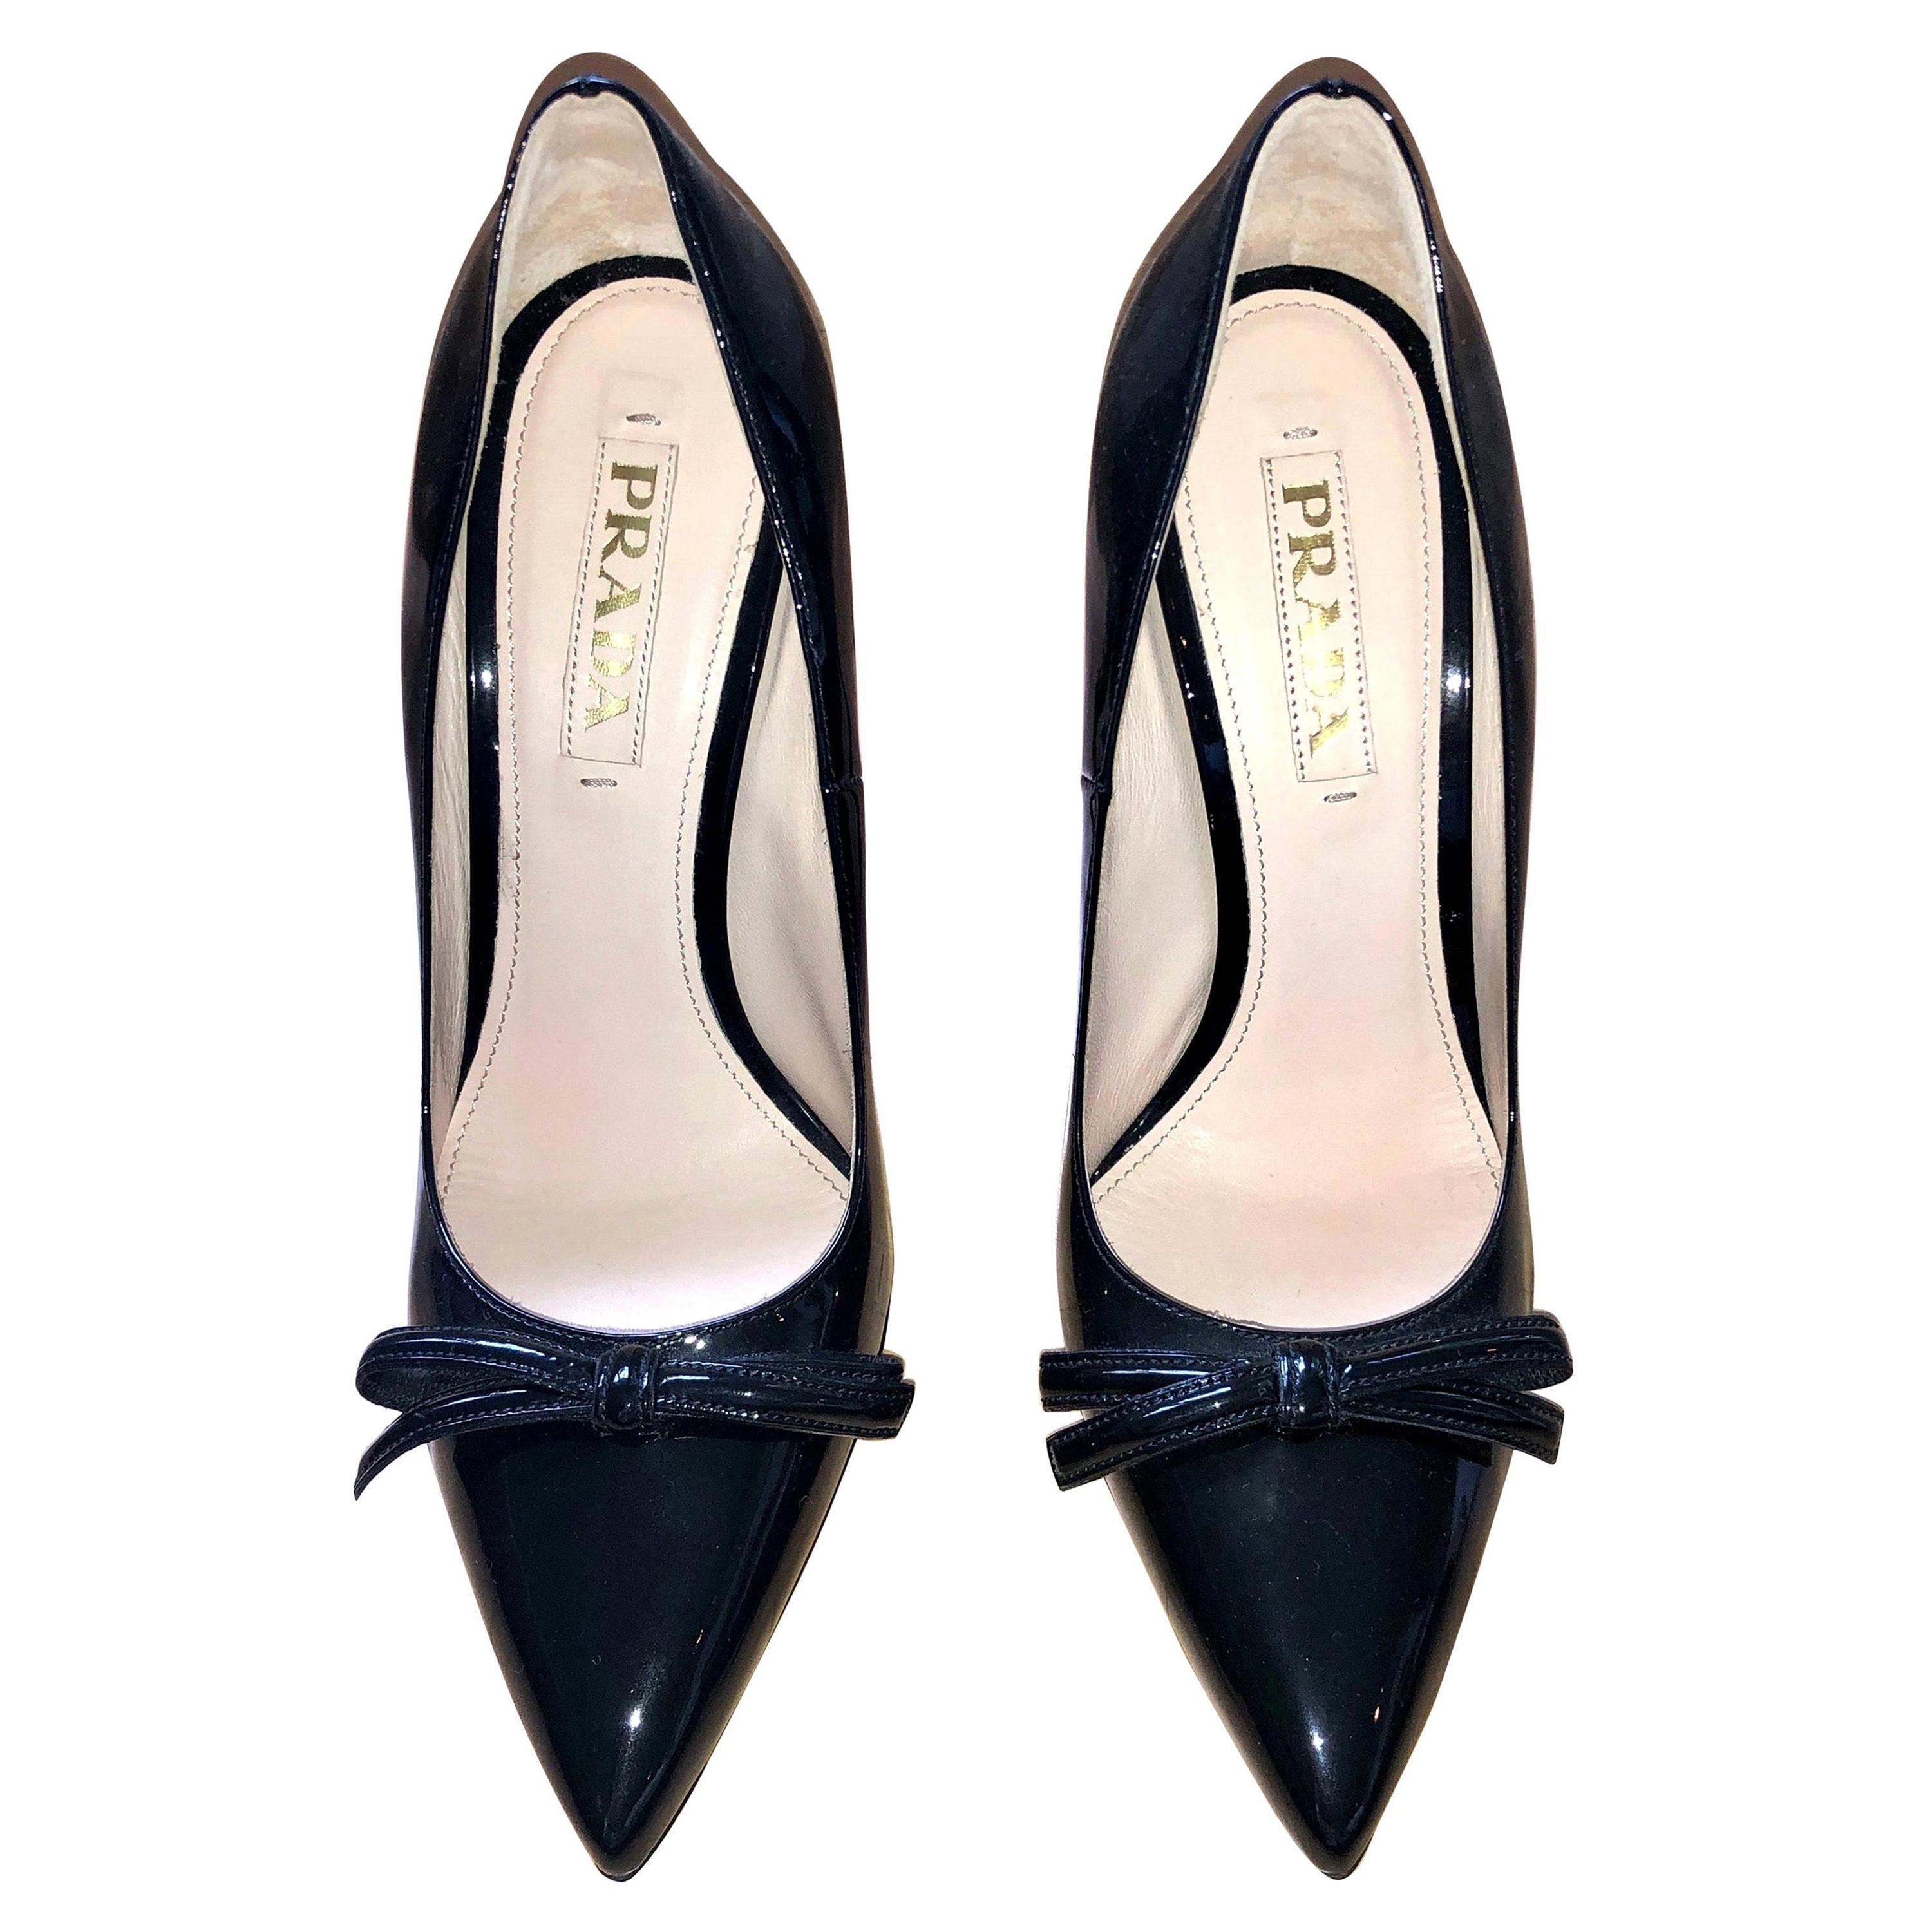 Prada Black Patent Leather Point Toe w/ Small Center Bow & Stiletto Heel Shoes For Sale